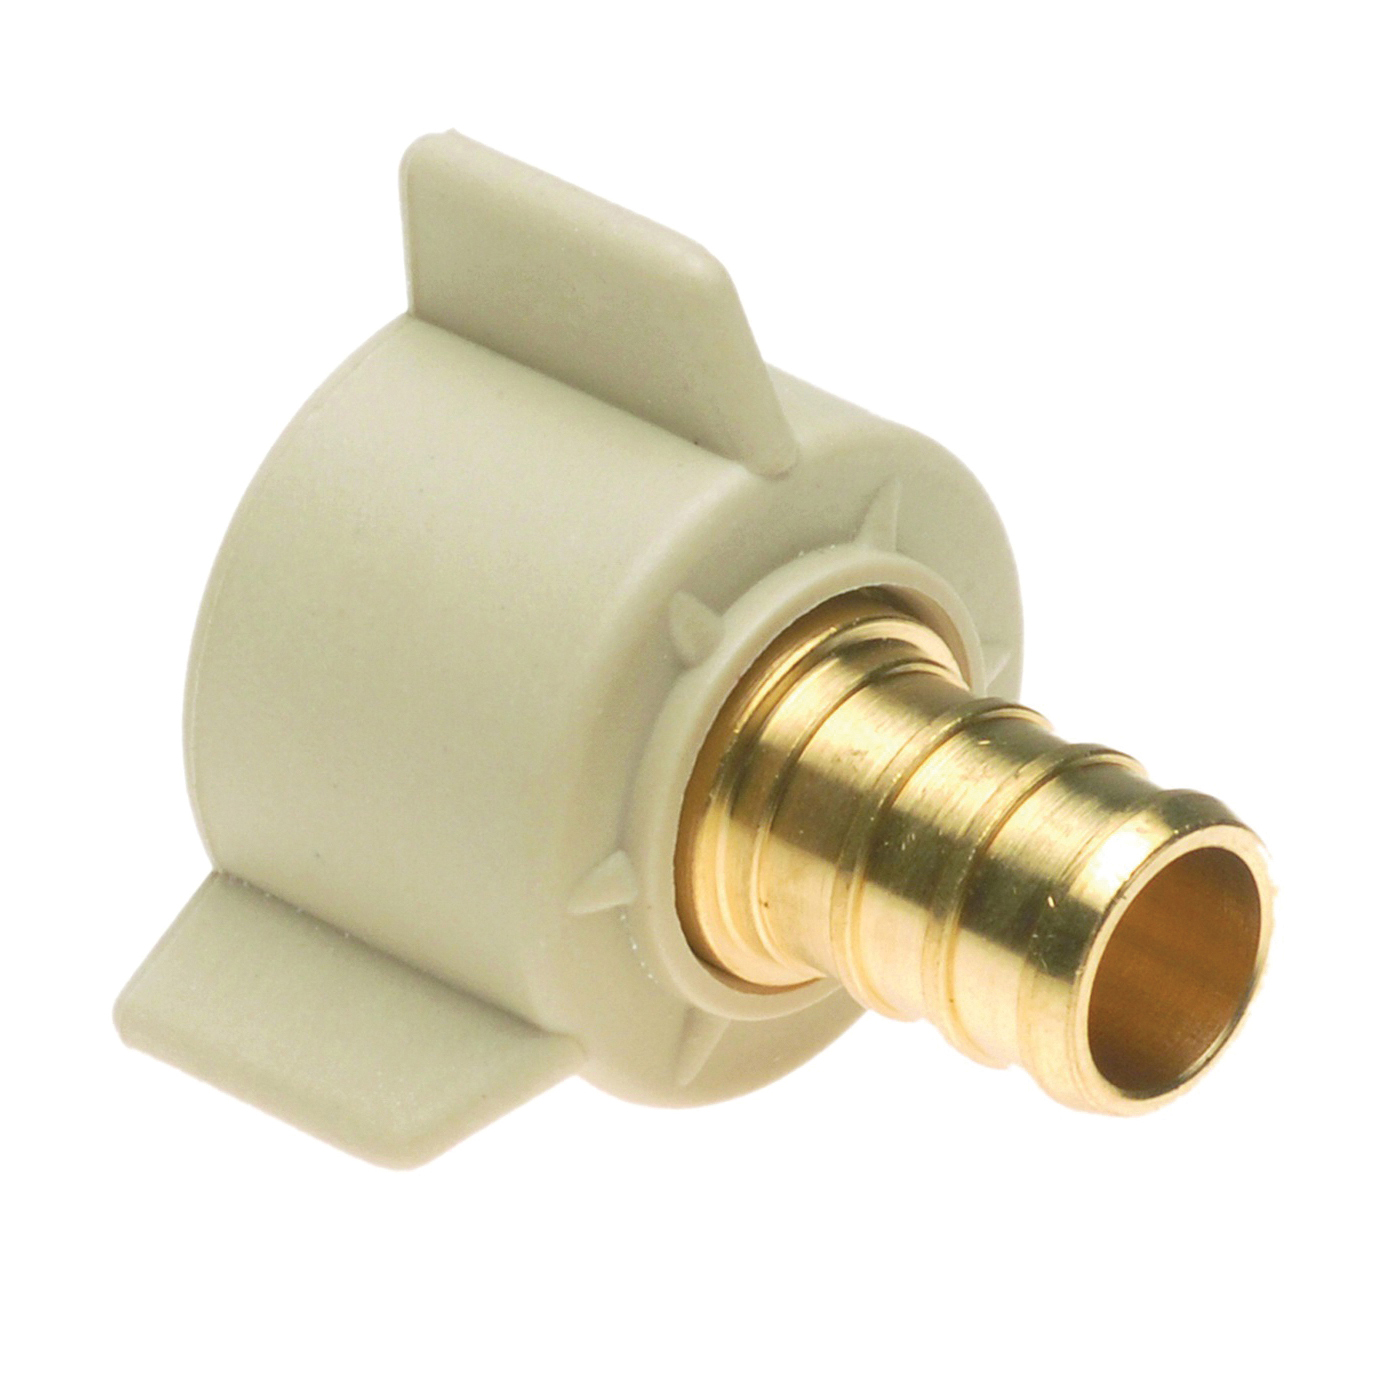 APXFB1212S Pipe Adapter, 1/2 in, PEX x FPT, Brass, 200 psi Pressure